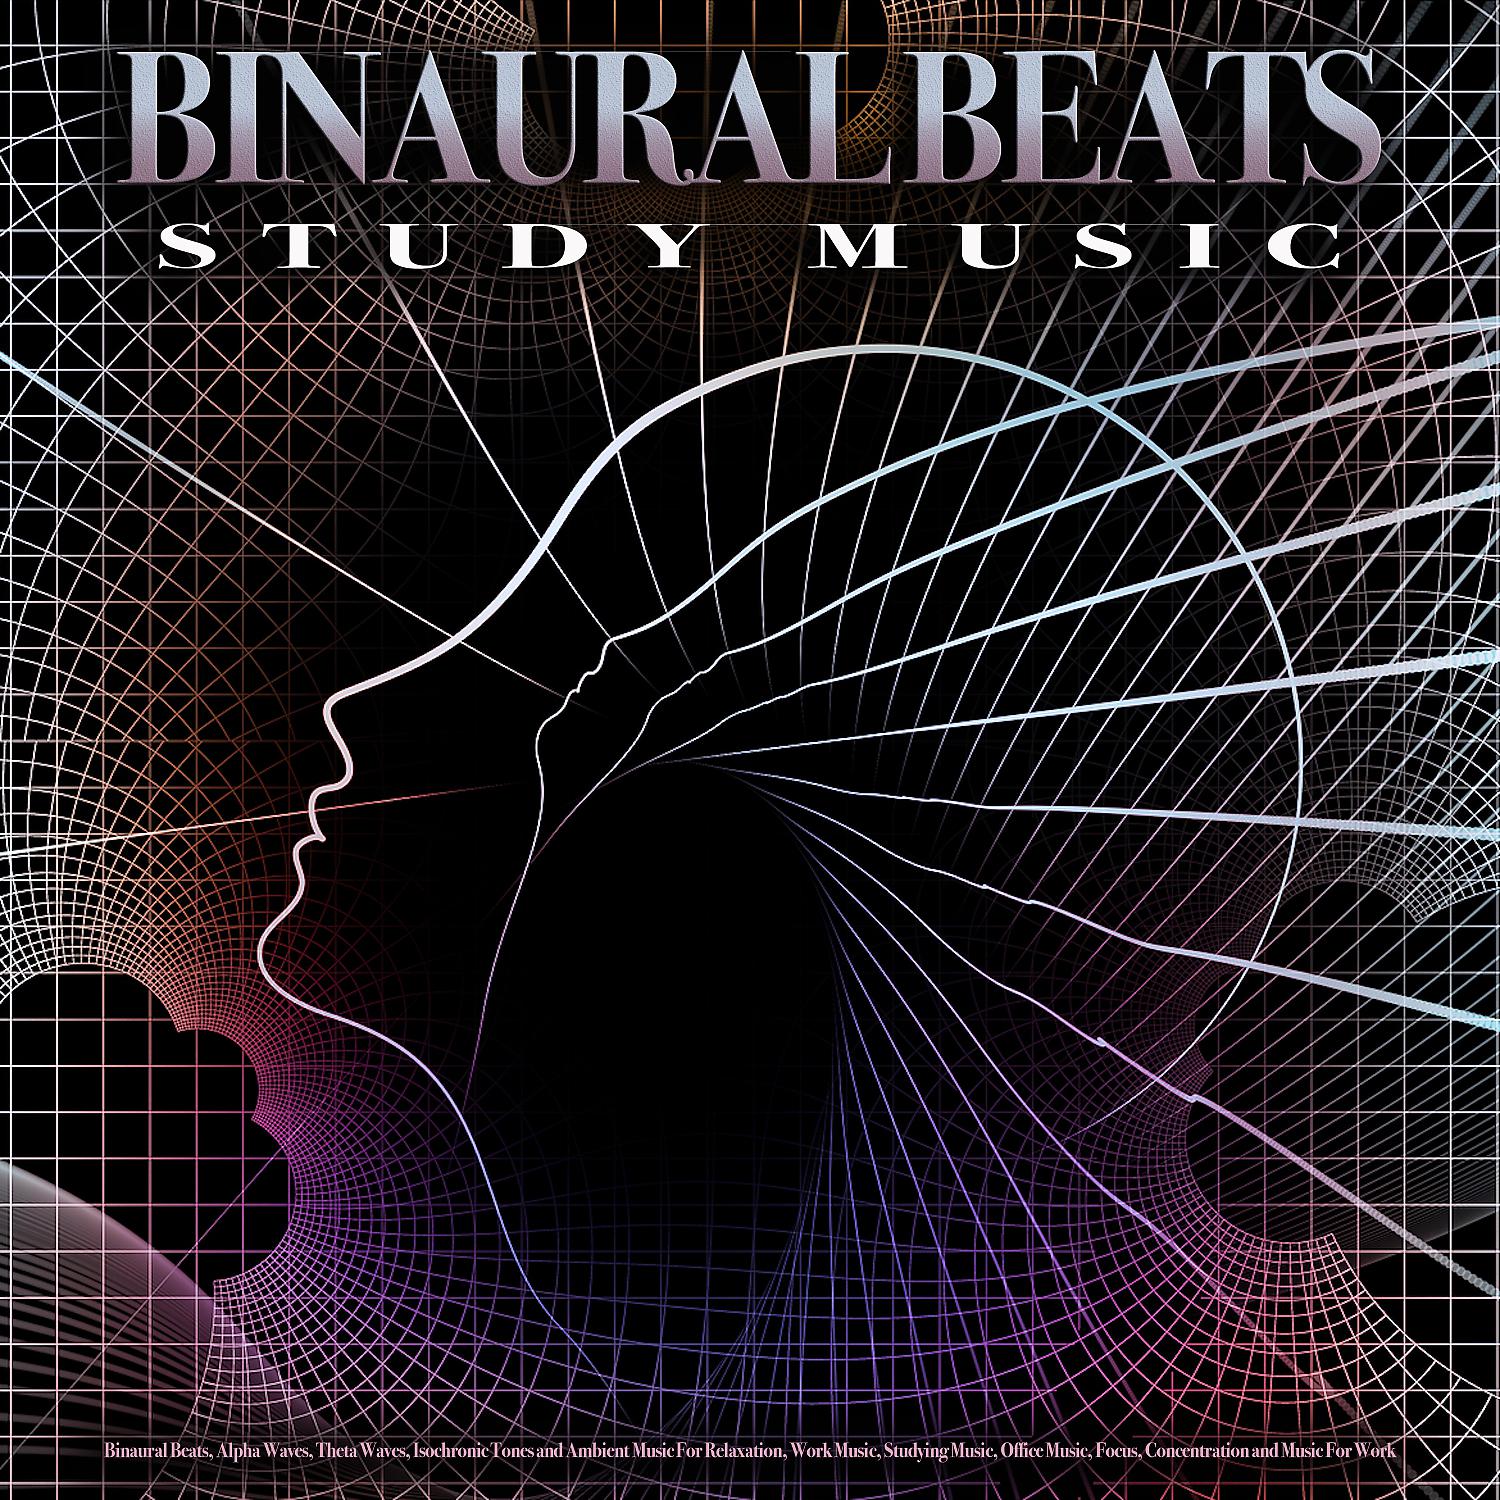 Постер альбома Binaural Beats Study Music: Binaural Beats, Alpha Waves, Theta Waves, Isochronic Tones and Ambient Music For Relaxation, Work Music, Studying Music, Office Music, Focus, Concentration and Music For Work